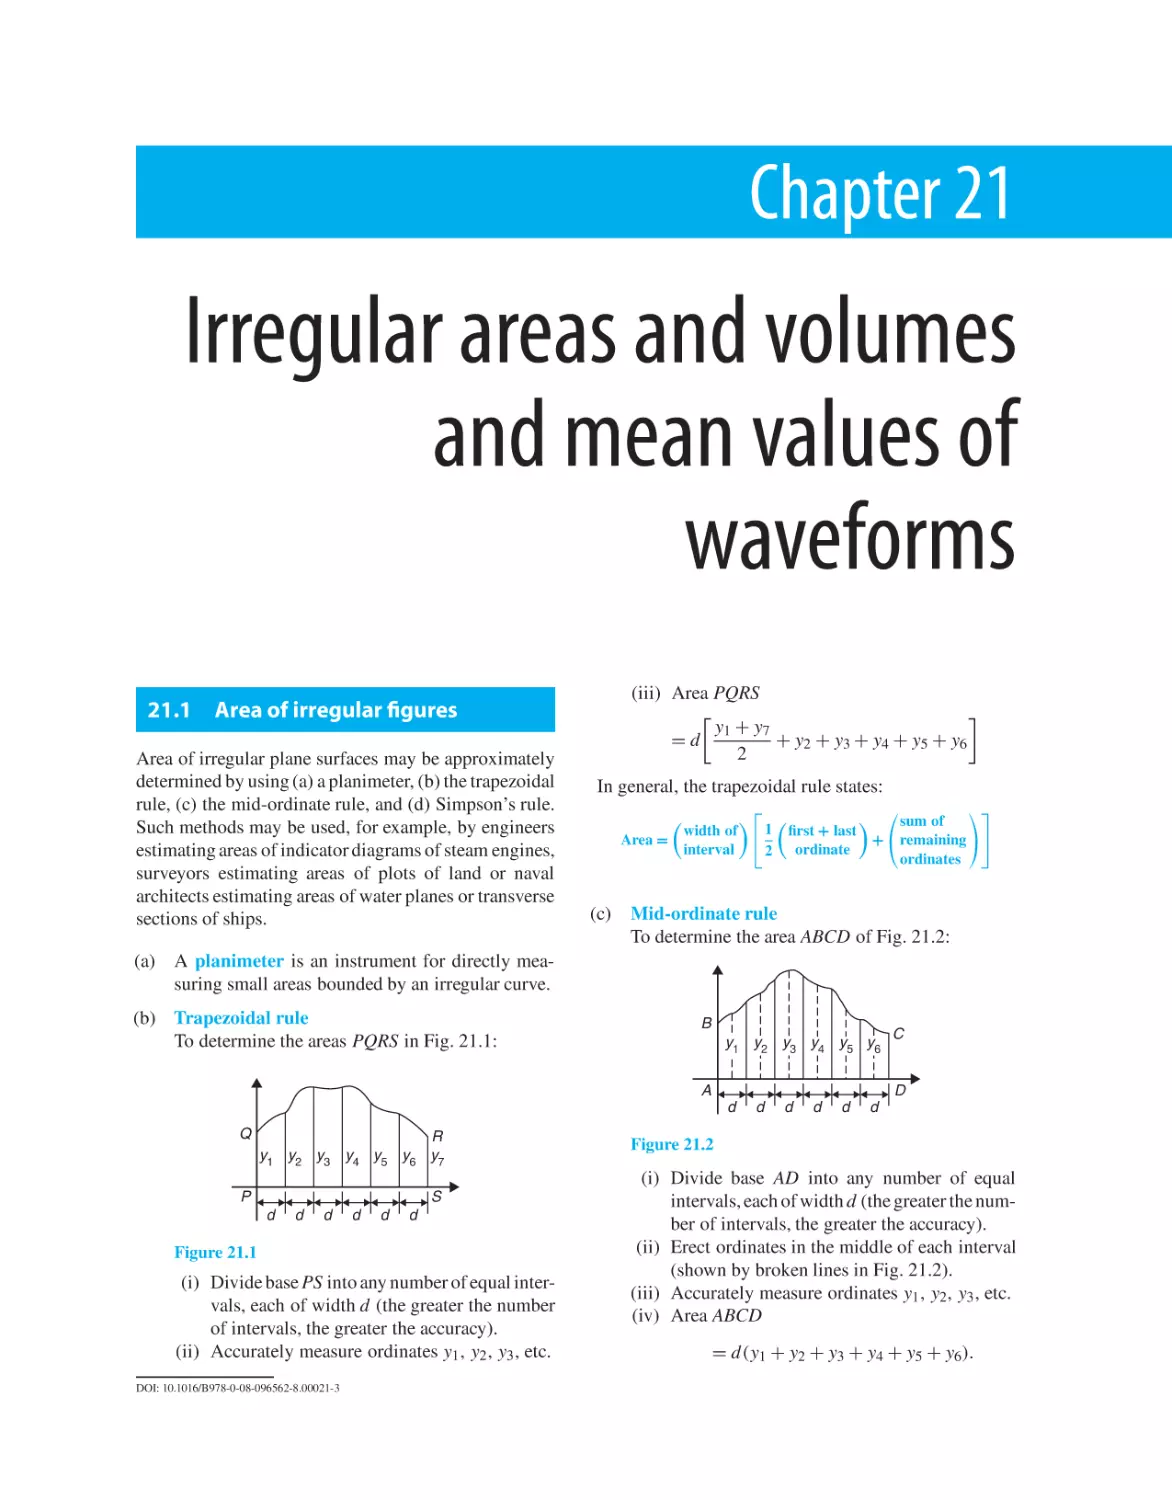 Chapter 21. Irregular areas and volumes and mean values of waveforms
21.1 Area of irregular figures